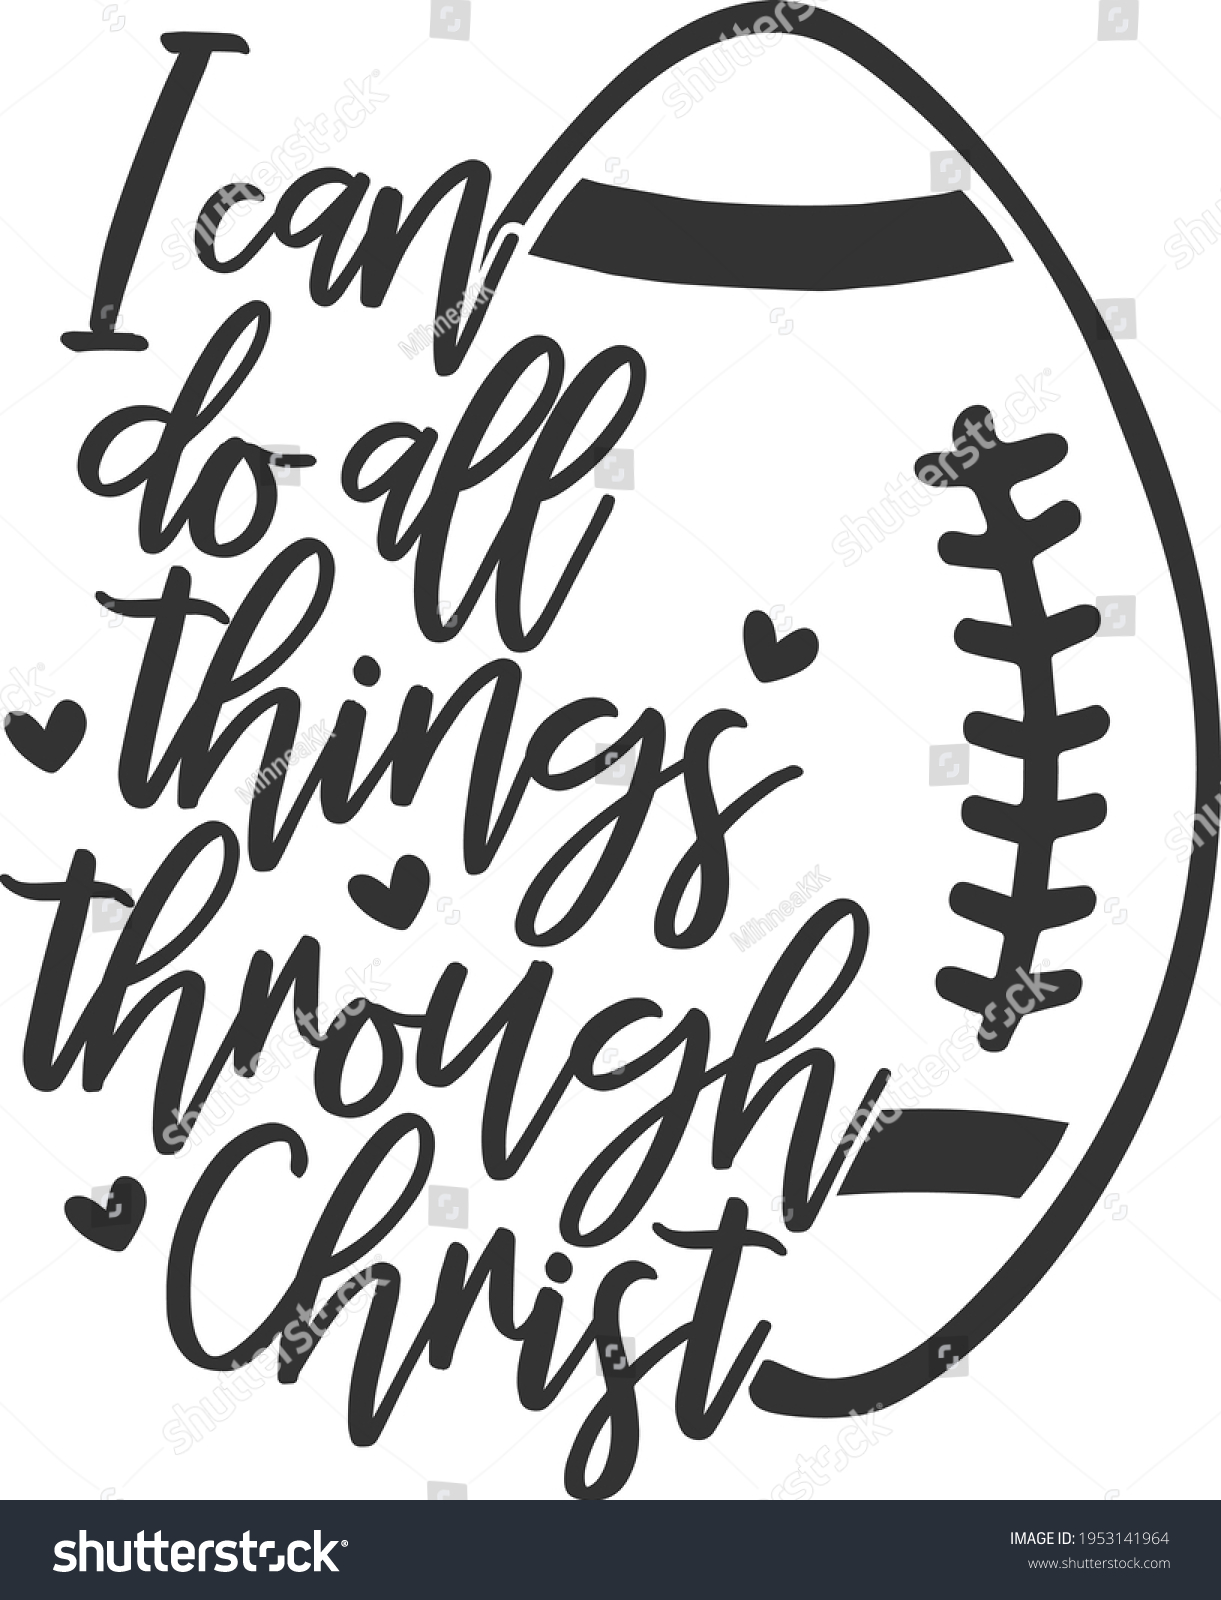 SVG of I Can Do All Things Though Christ - Football design svg